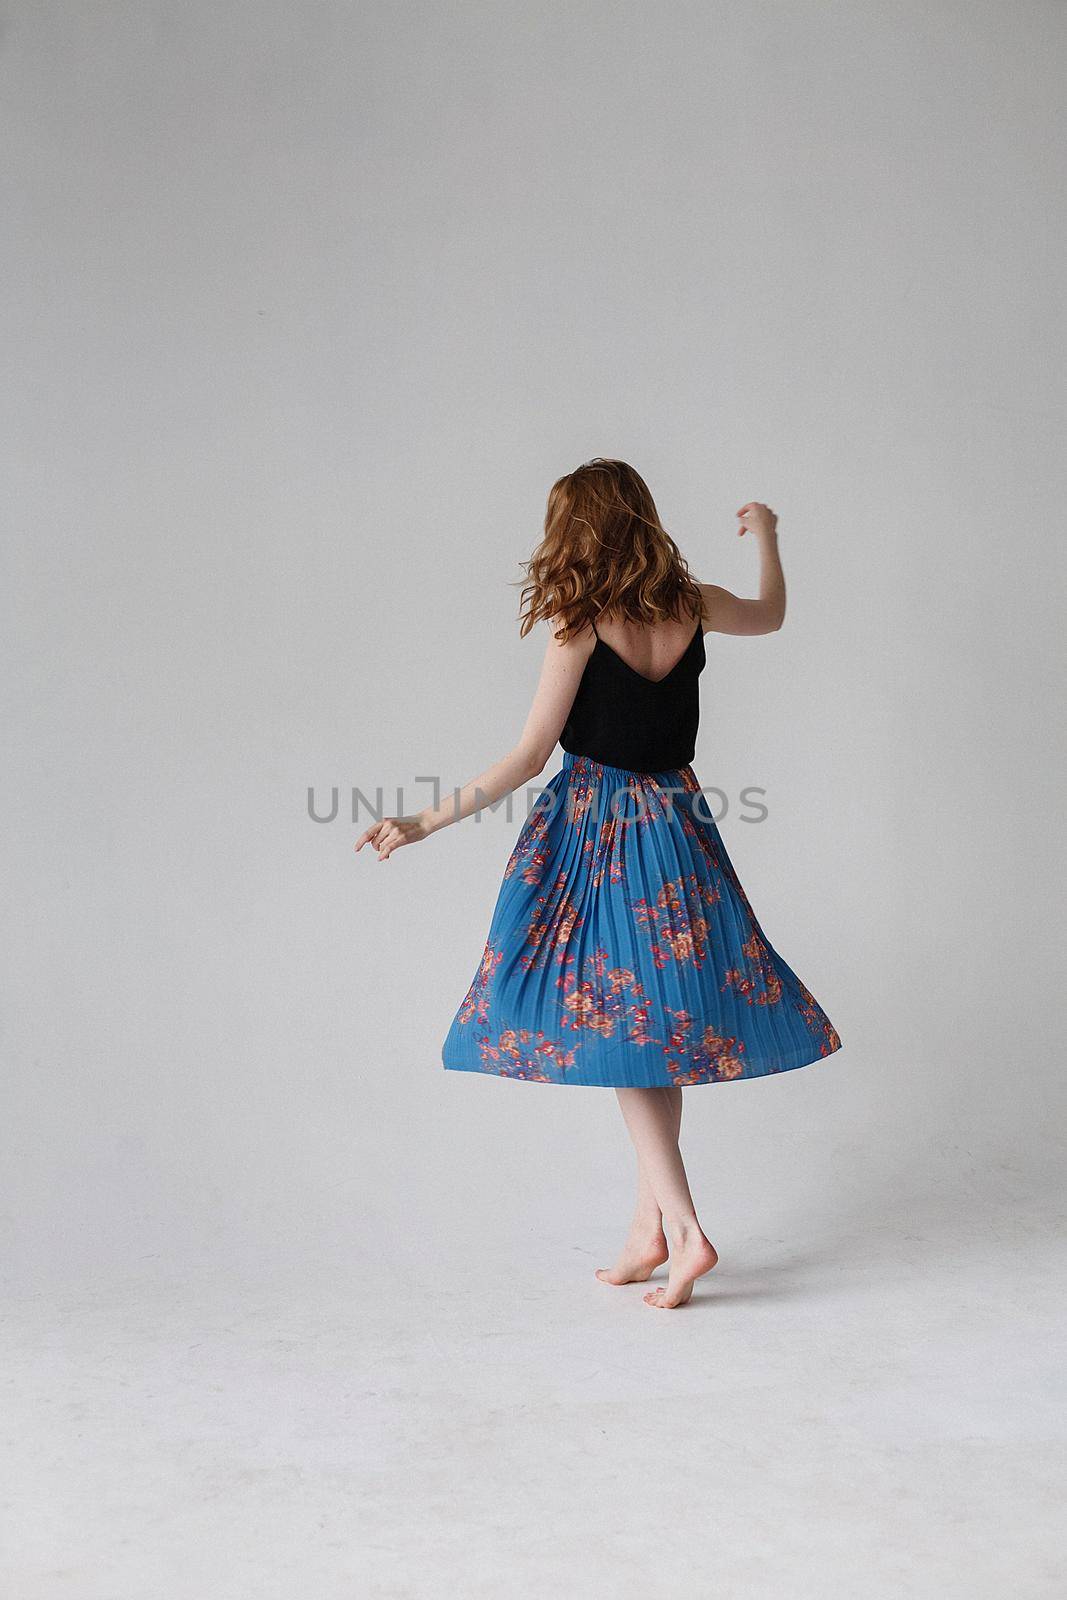 pretty woman in blue skirt with bare feet spinning around on white background. dancing movements of young lady, indoors portrait. caucasian skinny female with long brown hair dances on cyclorama